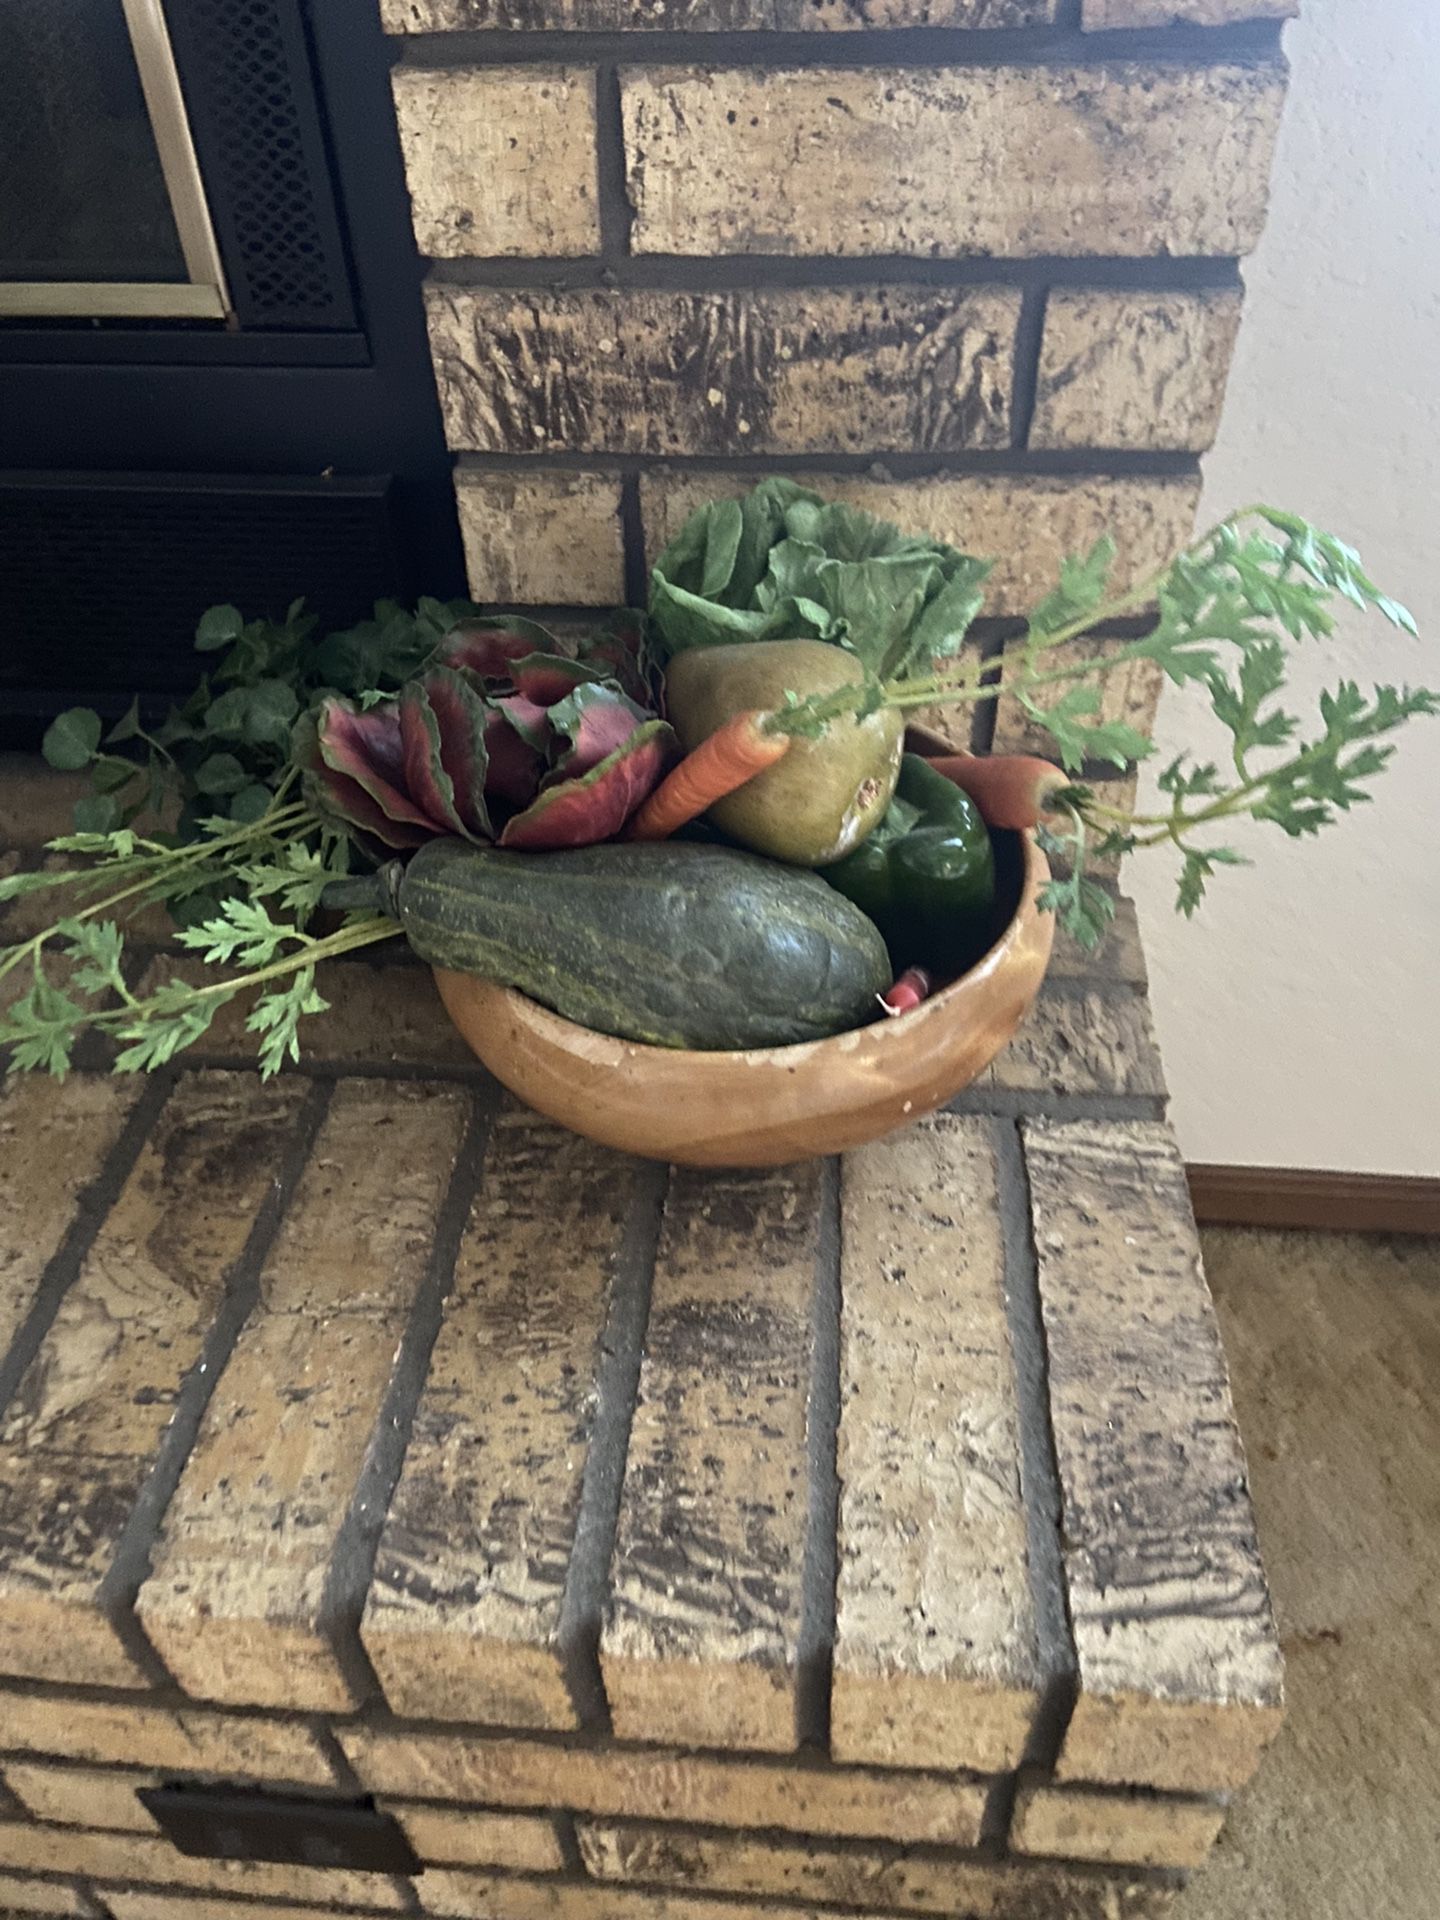 fake plant and vegetables